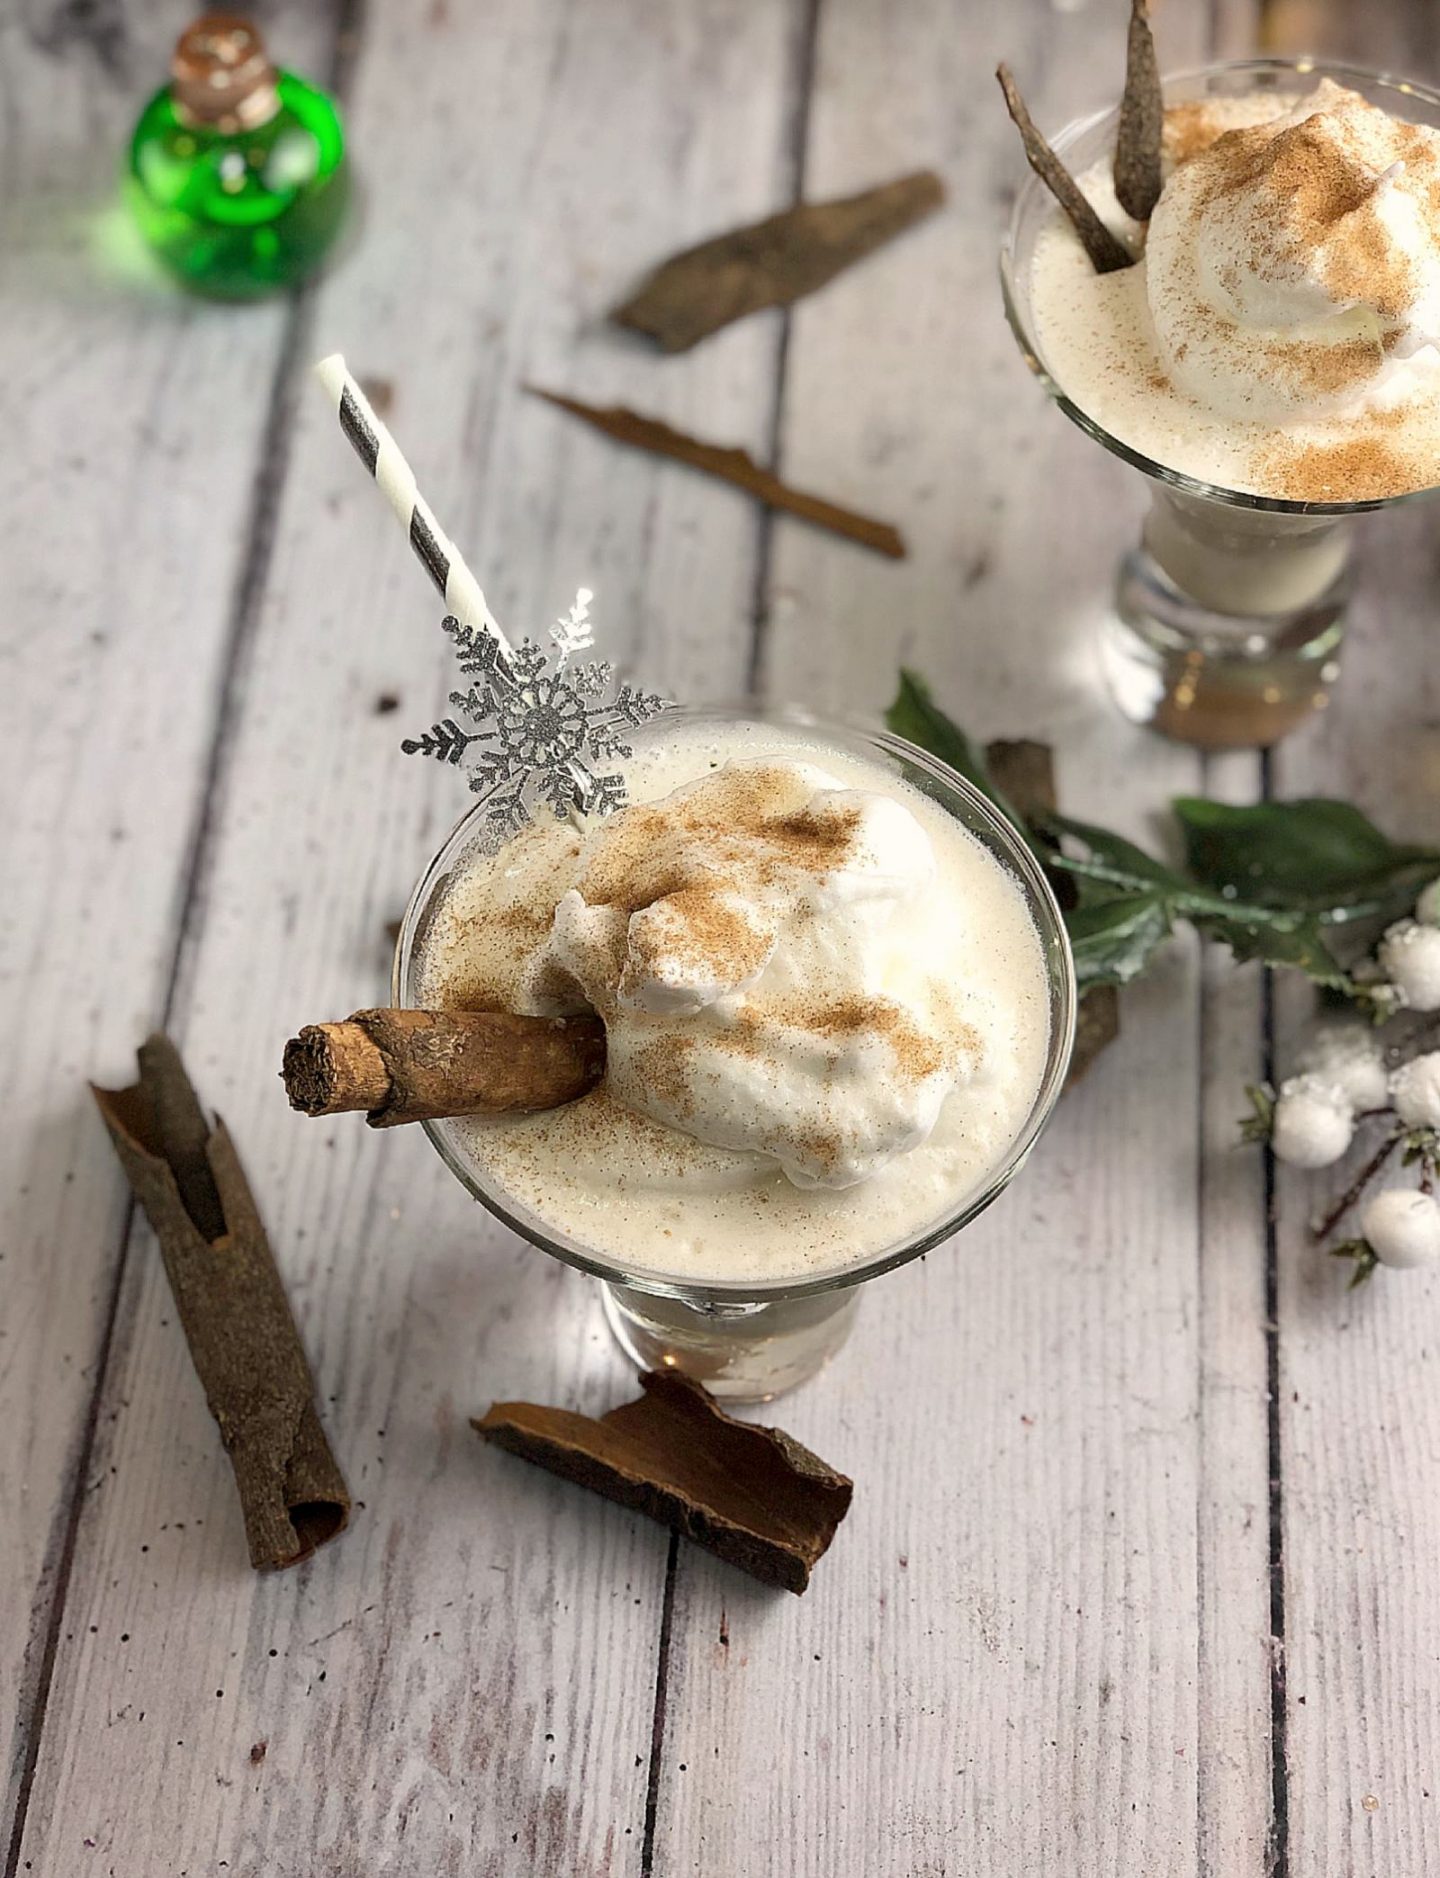 Baileys and Gin Frozen Christmas Cocktail an alternative version of Festive Eggnog. Quick and easy to make and perfect for Christmas parties, chilling in front of movies and generally feeling festive.